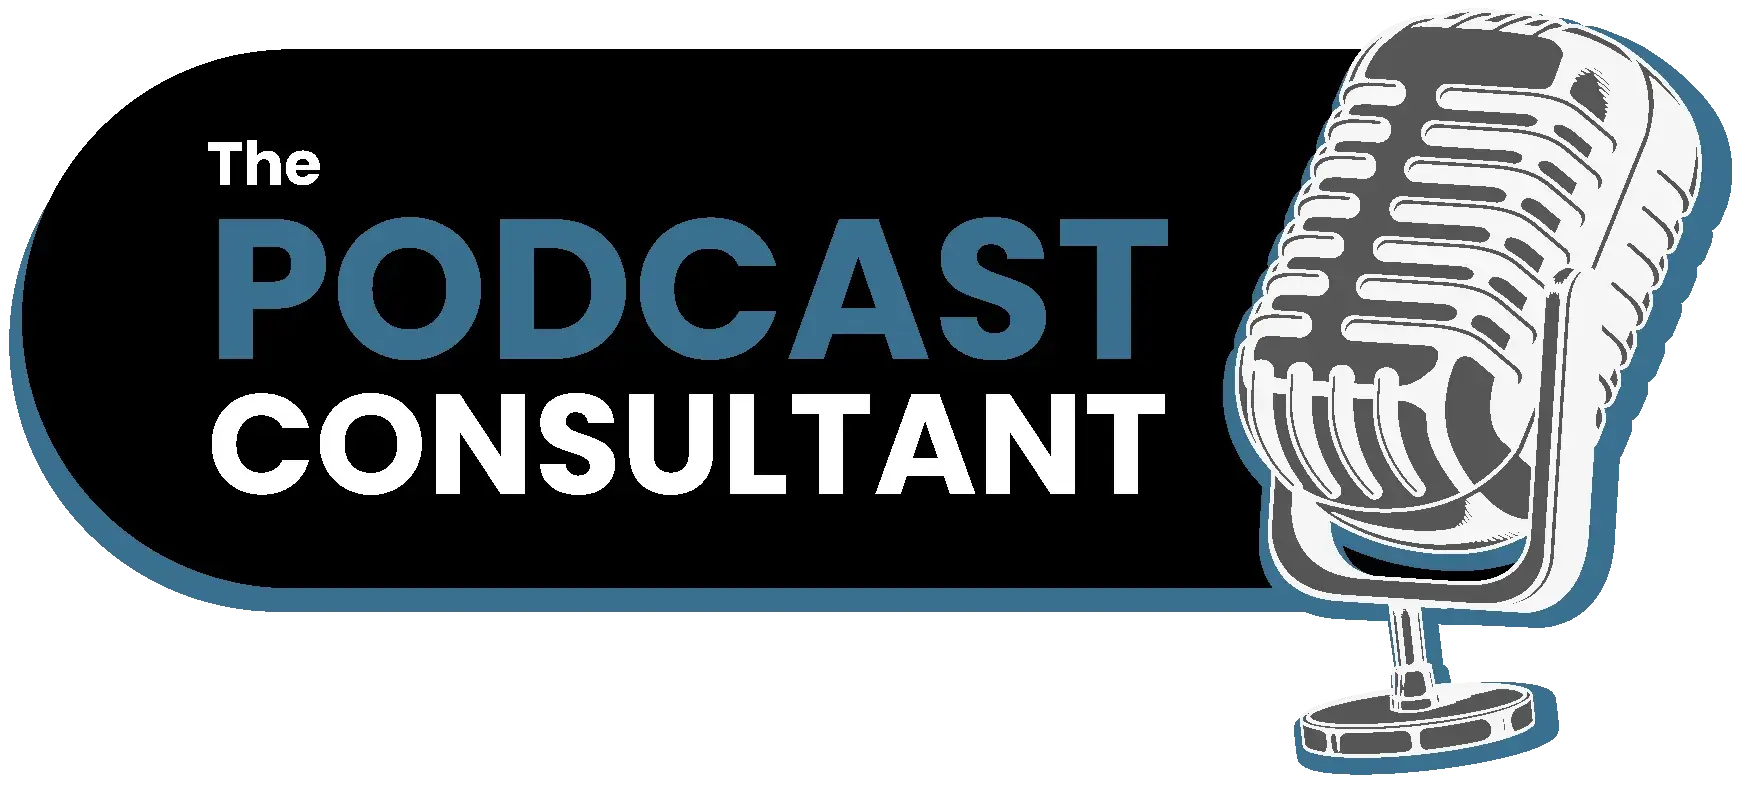 the podcast consultant microphone